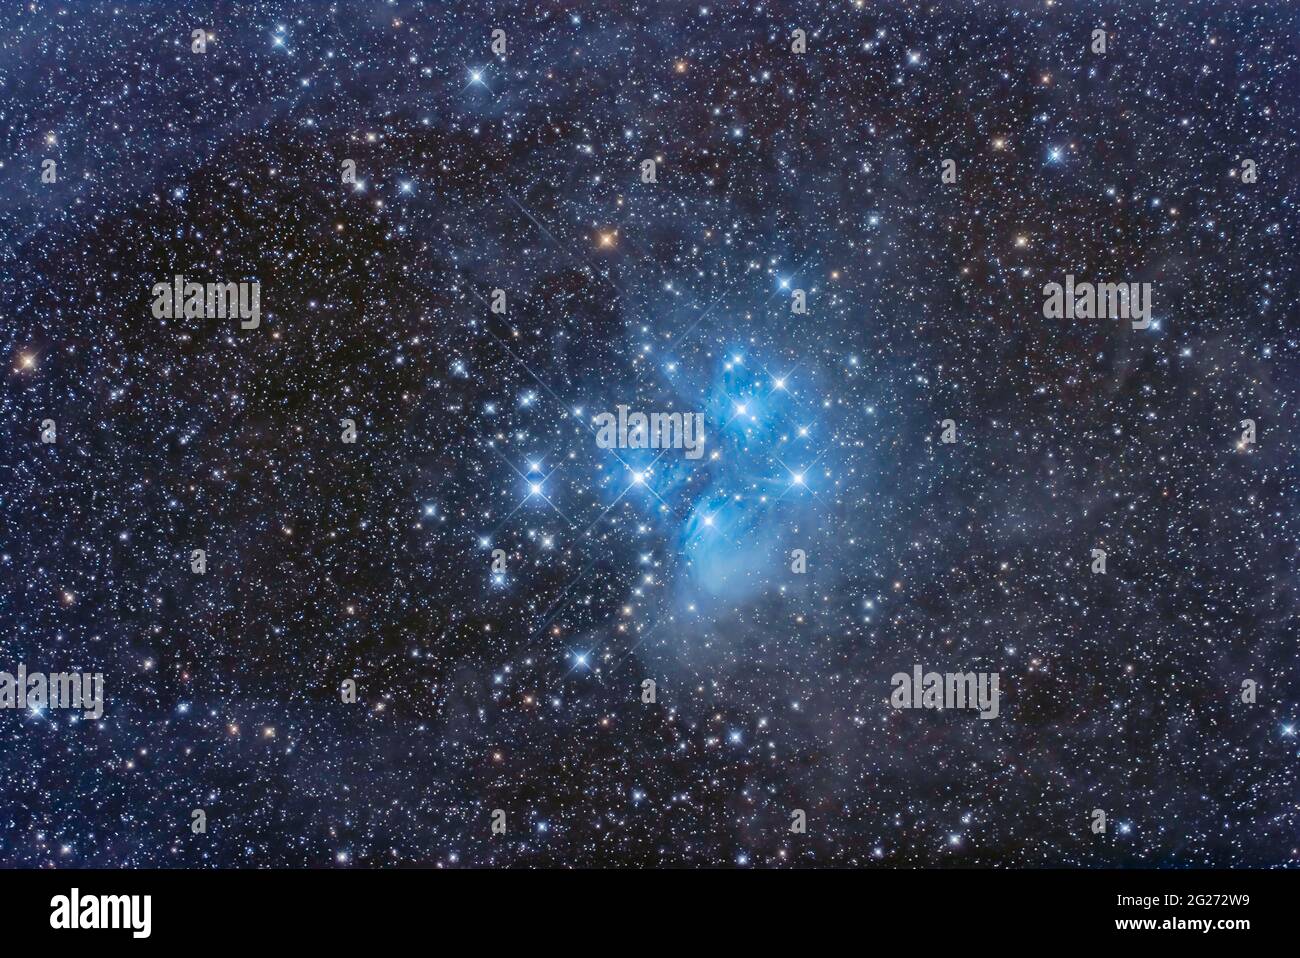 The Pleiades star cluster, Messier 45, amid the faint and dusty nebulosity that surrounds it. The stars of the Pleiades are passing through the dust c Stock Photo